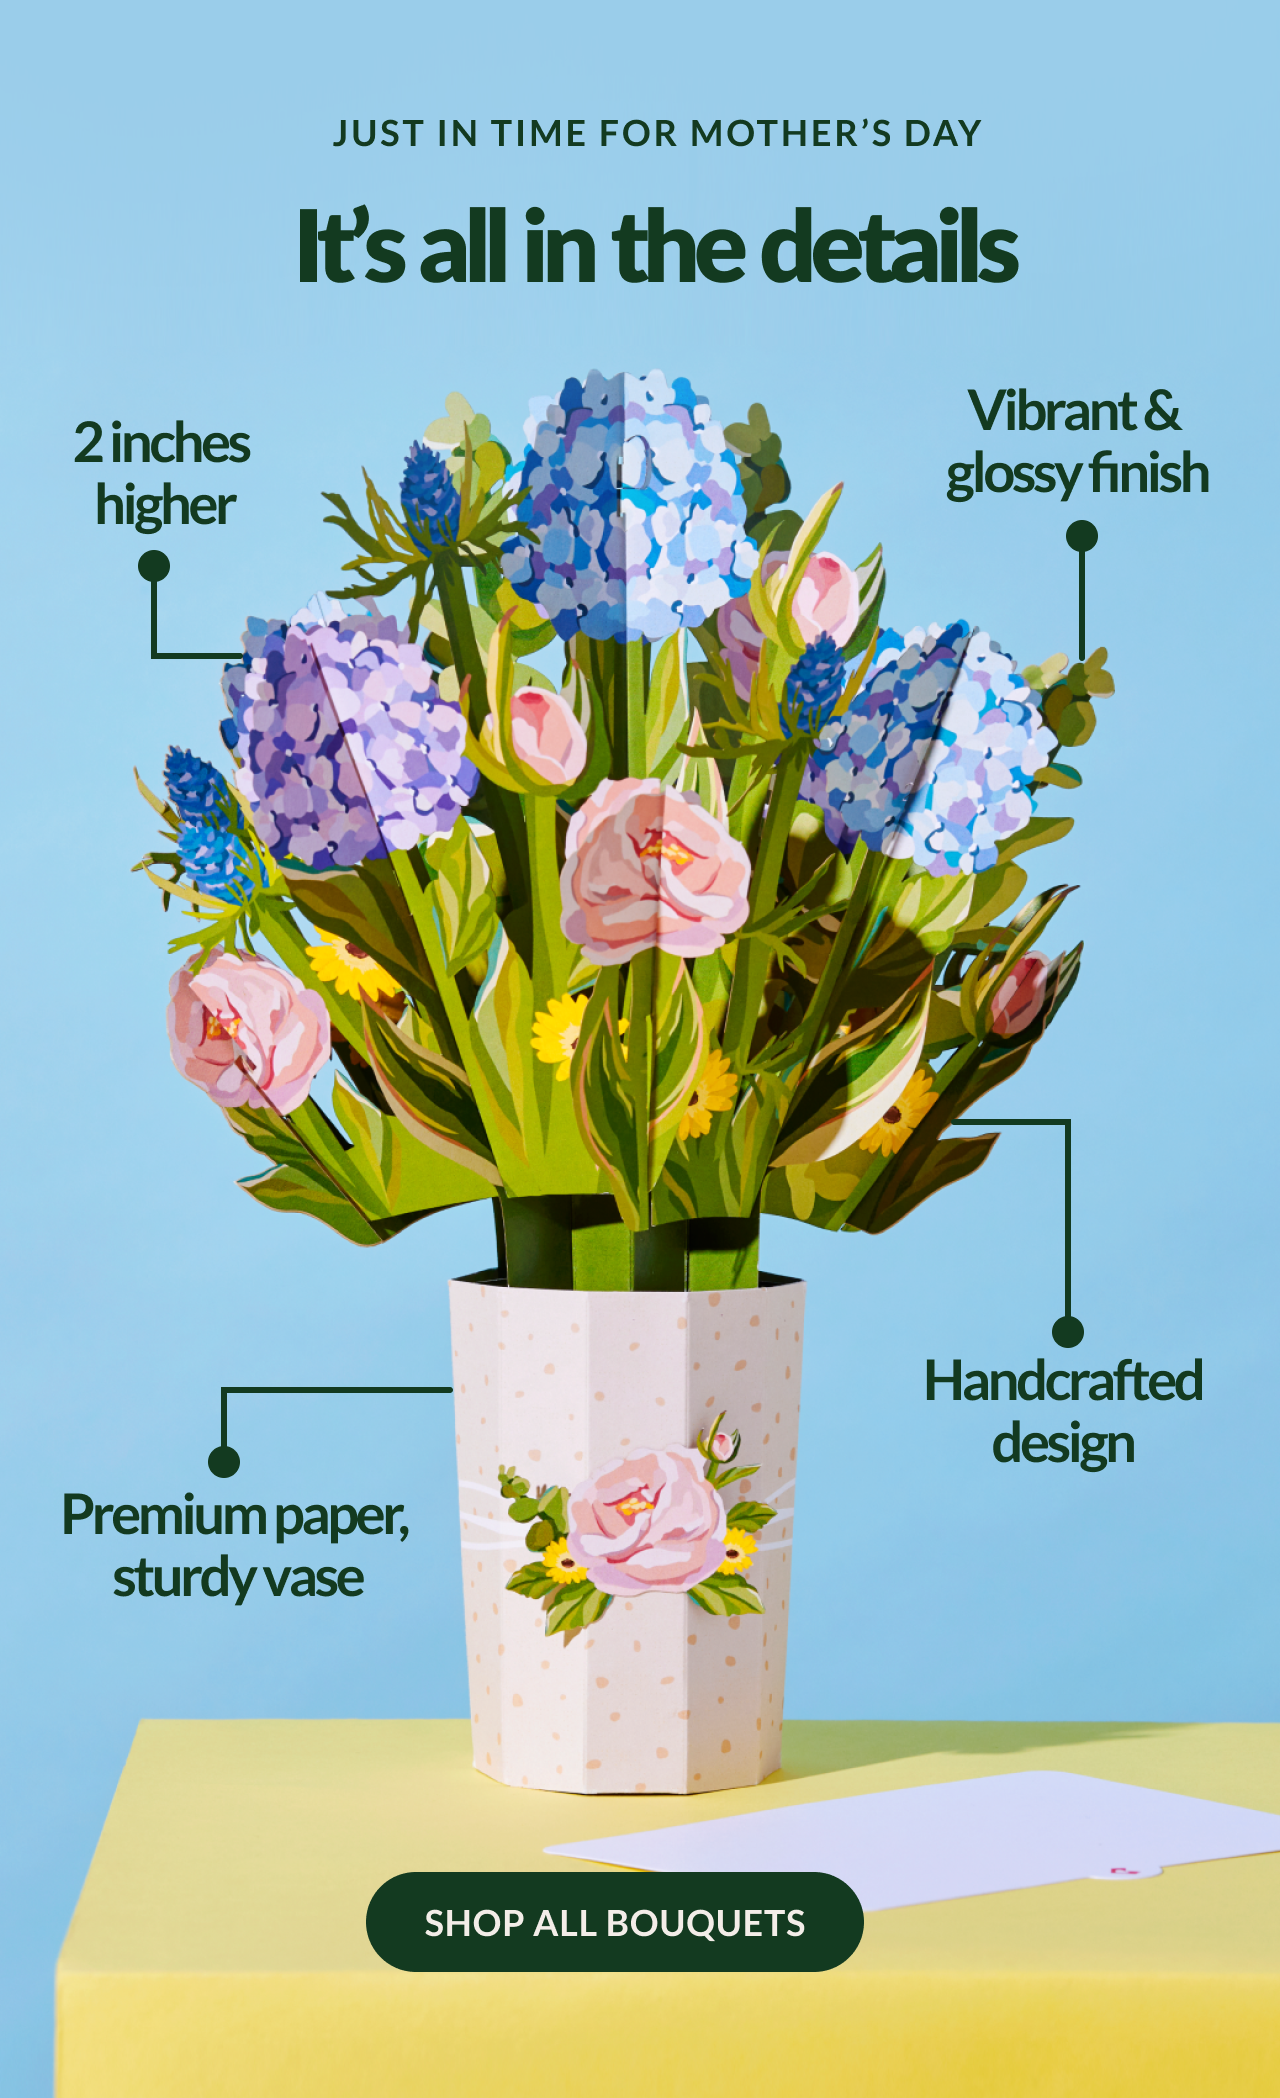 JUST IN TIME FOR MOTHER’S DAY | It’s all in the details | 2 inches higher | Vibrant & glossy finish | Premium paper, sturdy vase | Handcrafted Design | SHOP ALL BOUQUETS